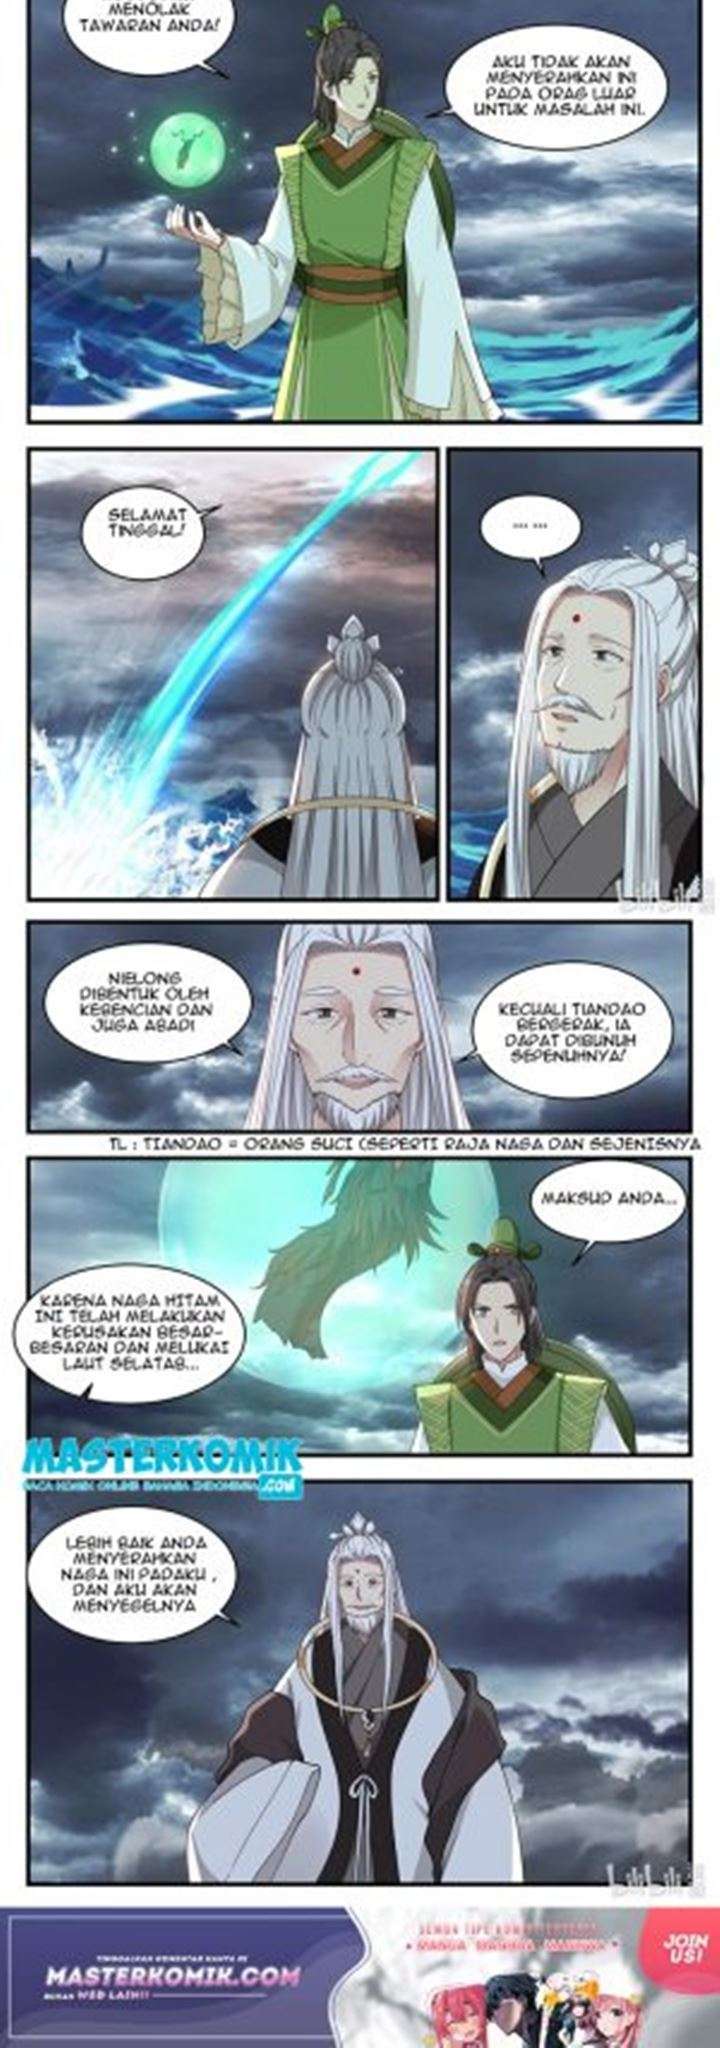 Dragon Throne Chapter 47